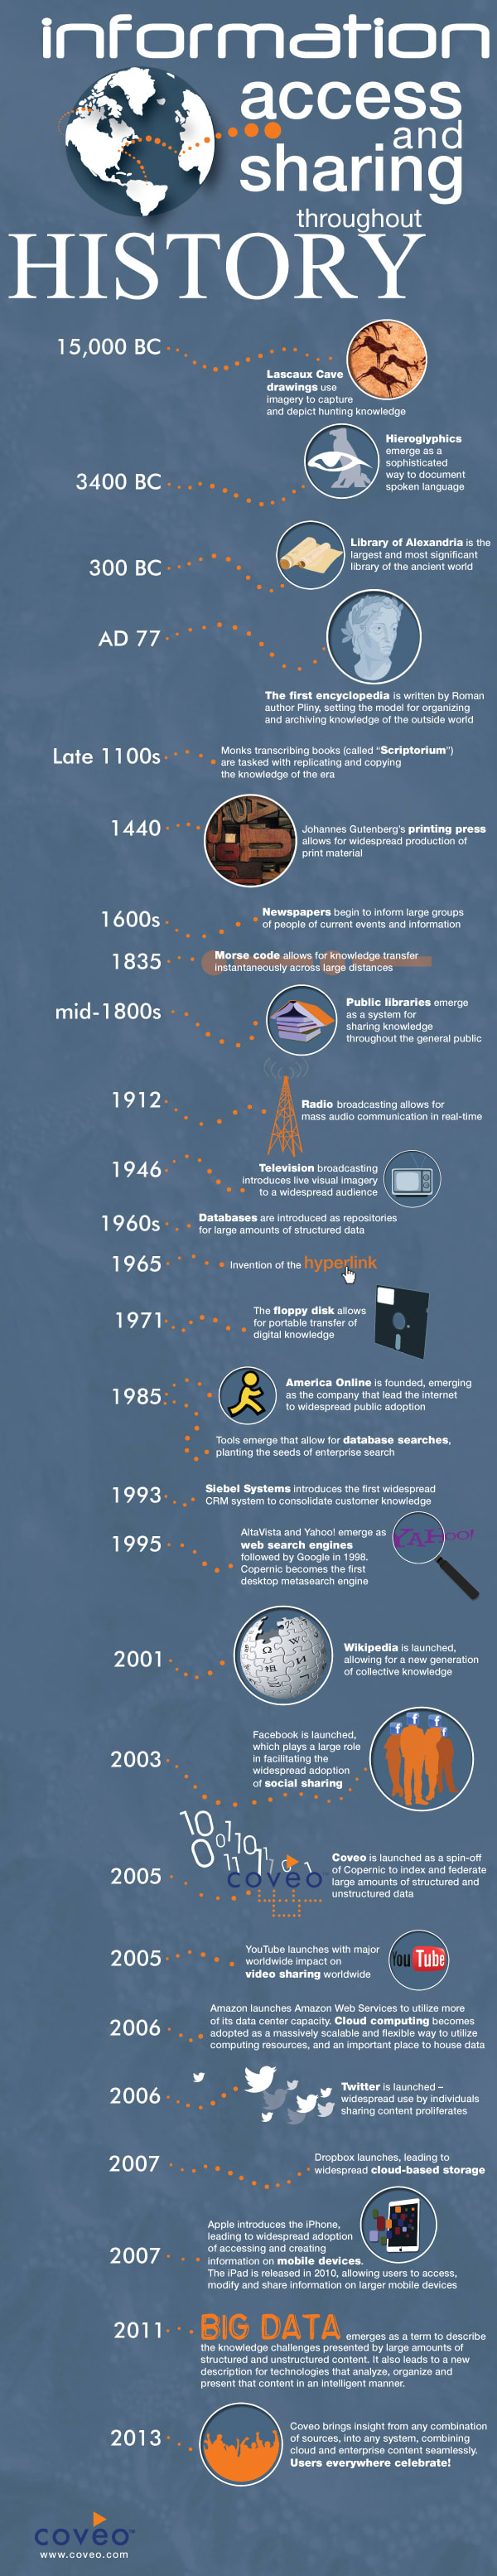 Infographic: History of Knowledge Sharing